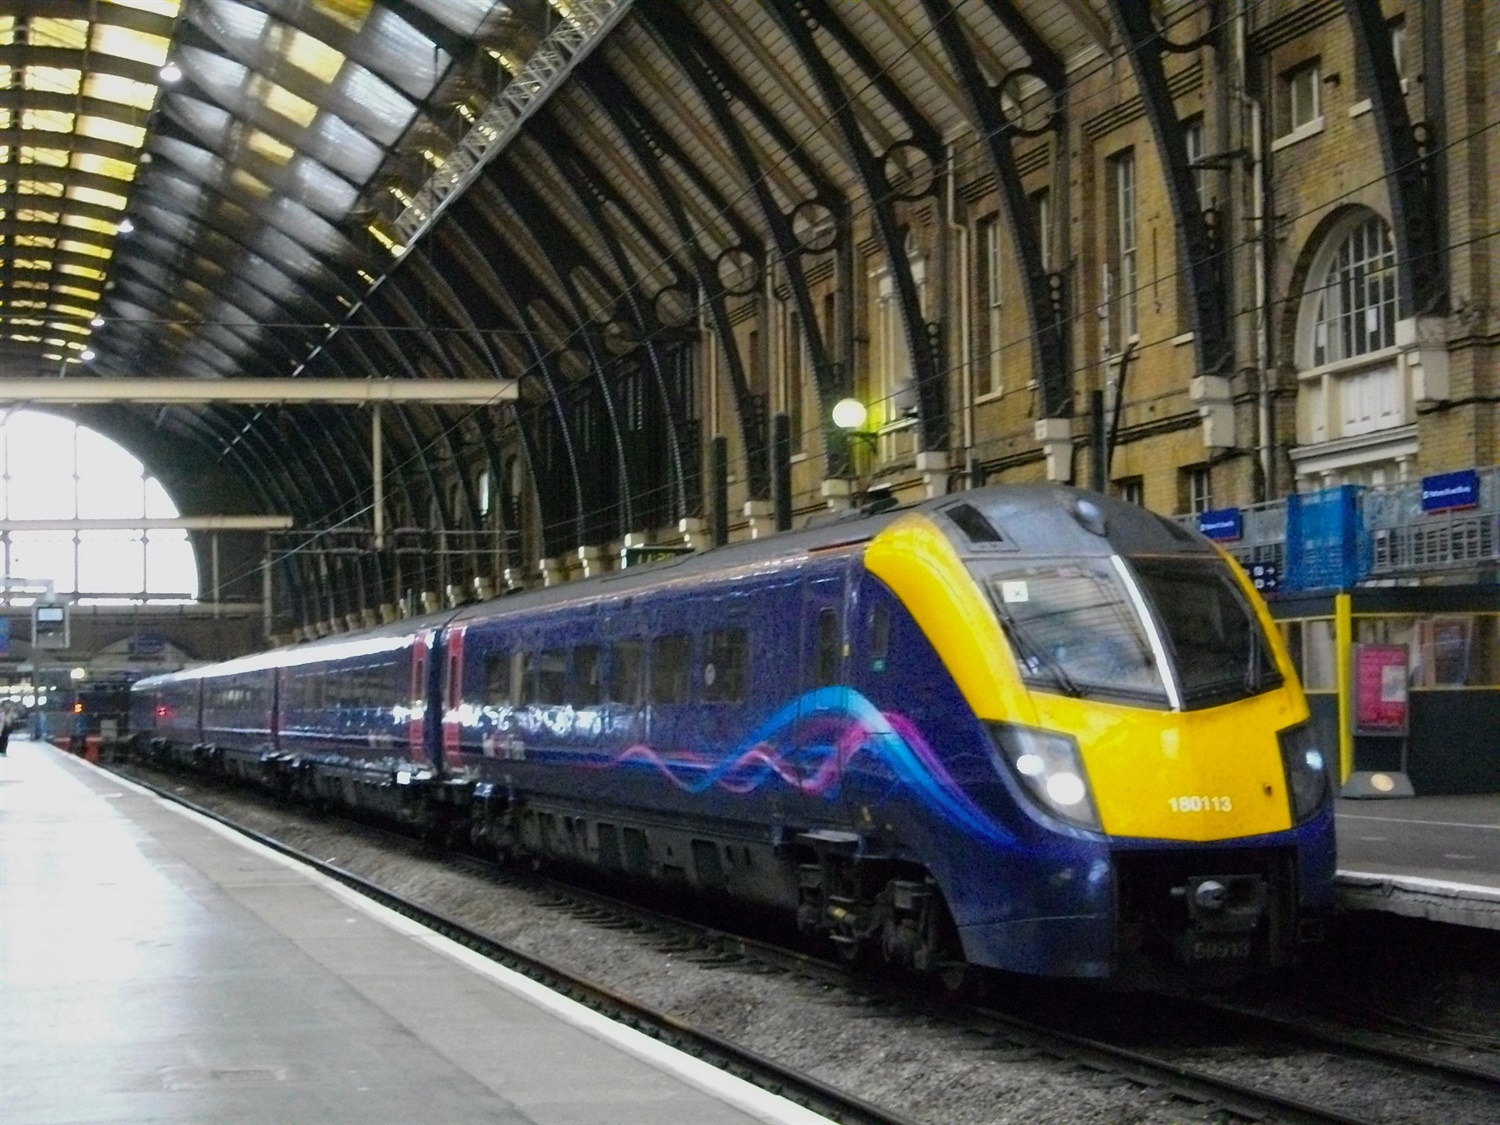 Hull Trains starts operating first direct services from Beverley to London